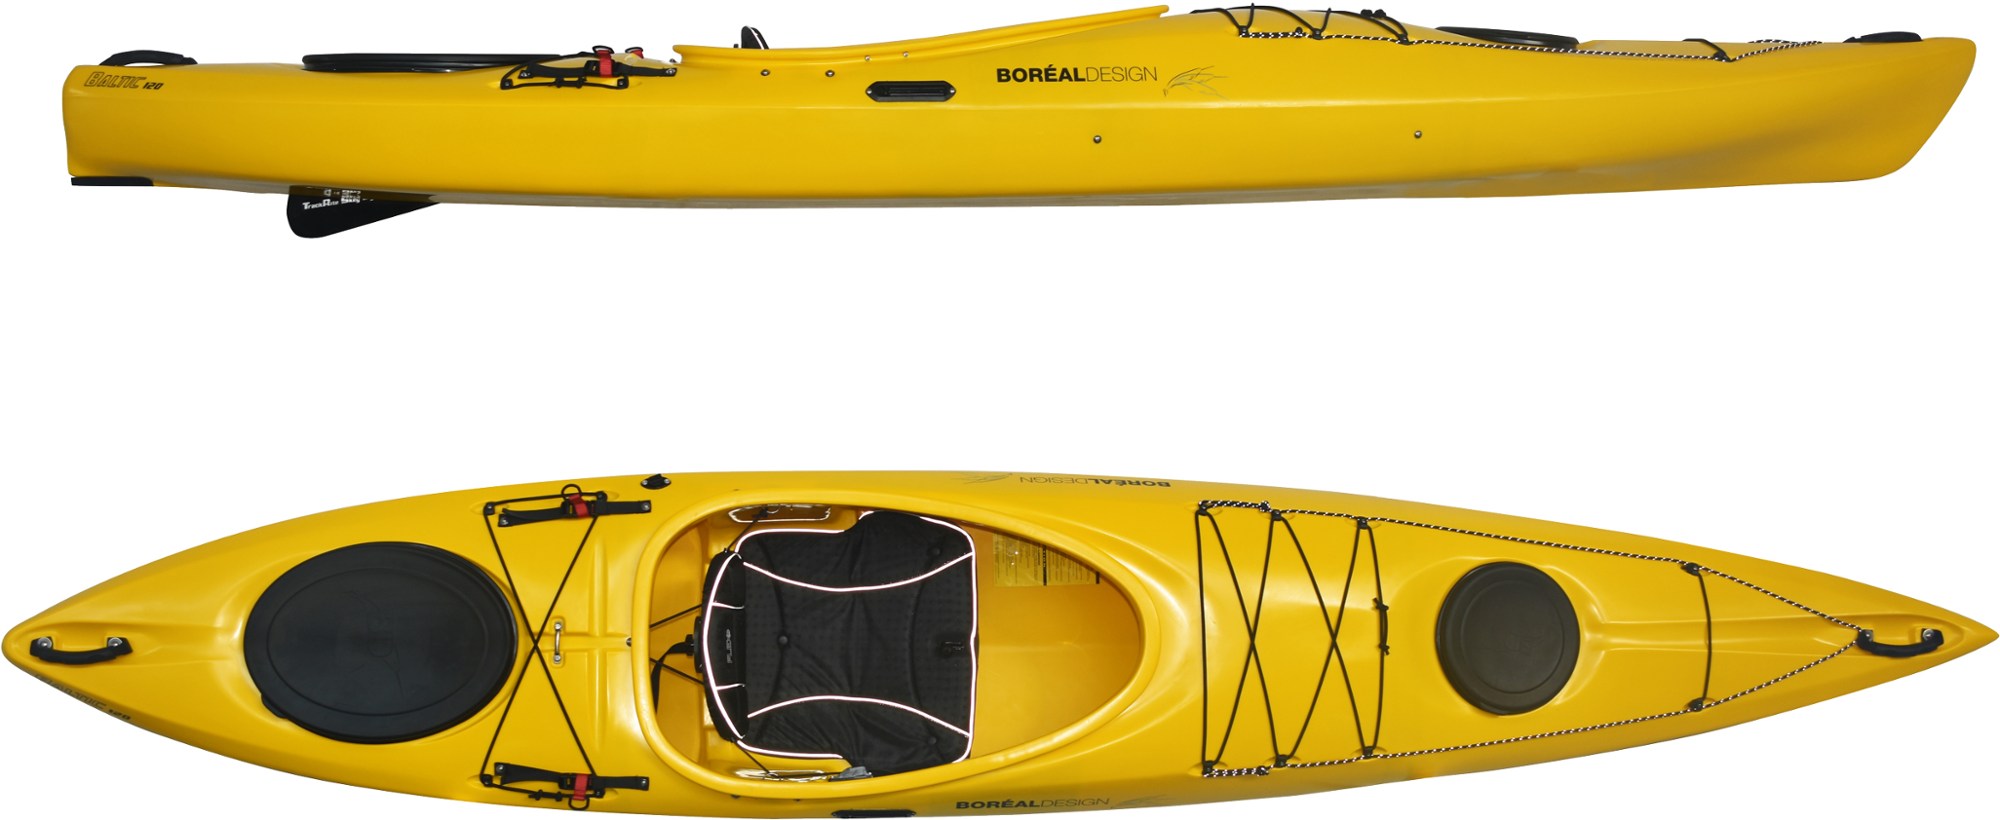 Best Kayak Deals and Sales for May 2022 - The Manual